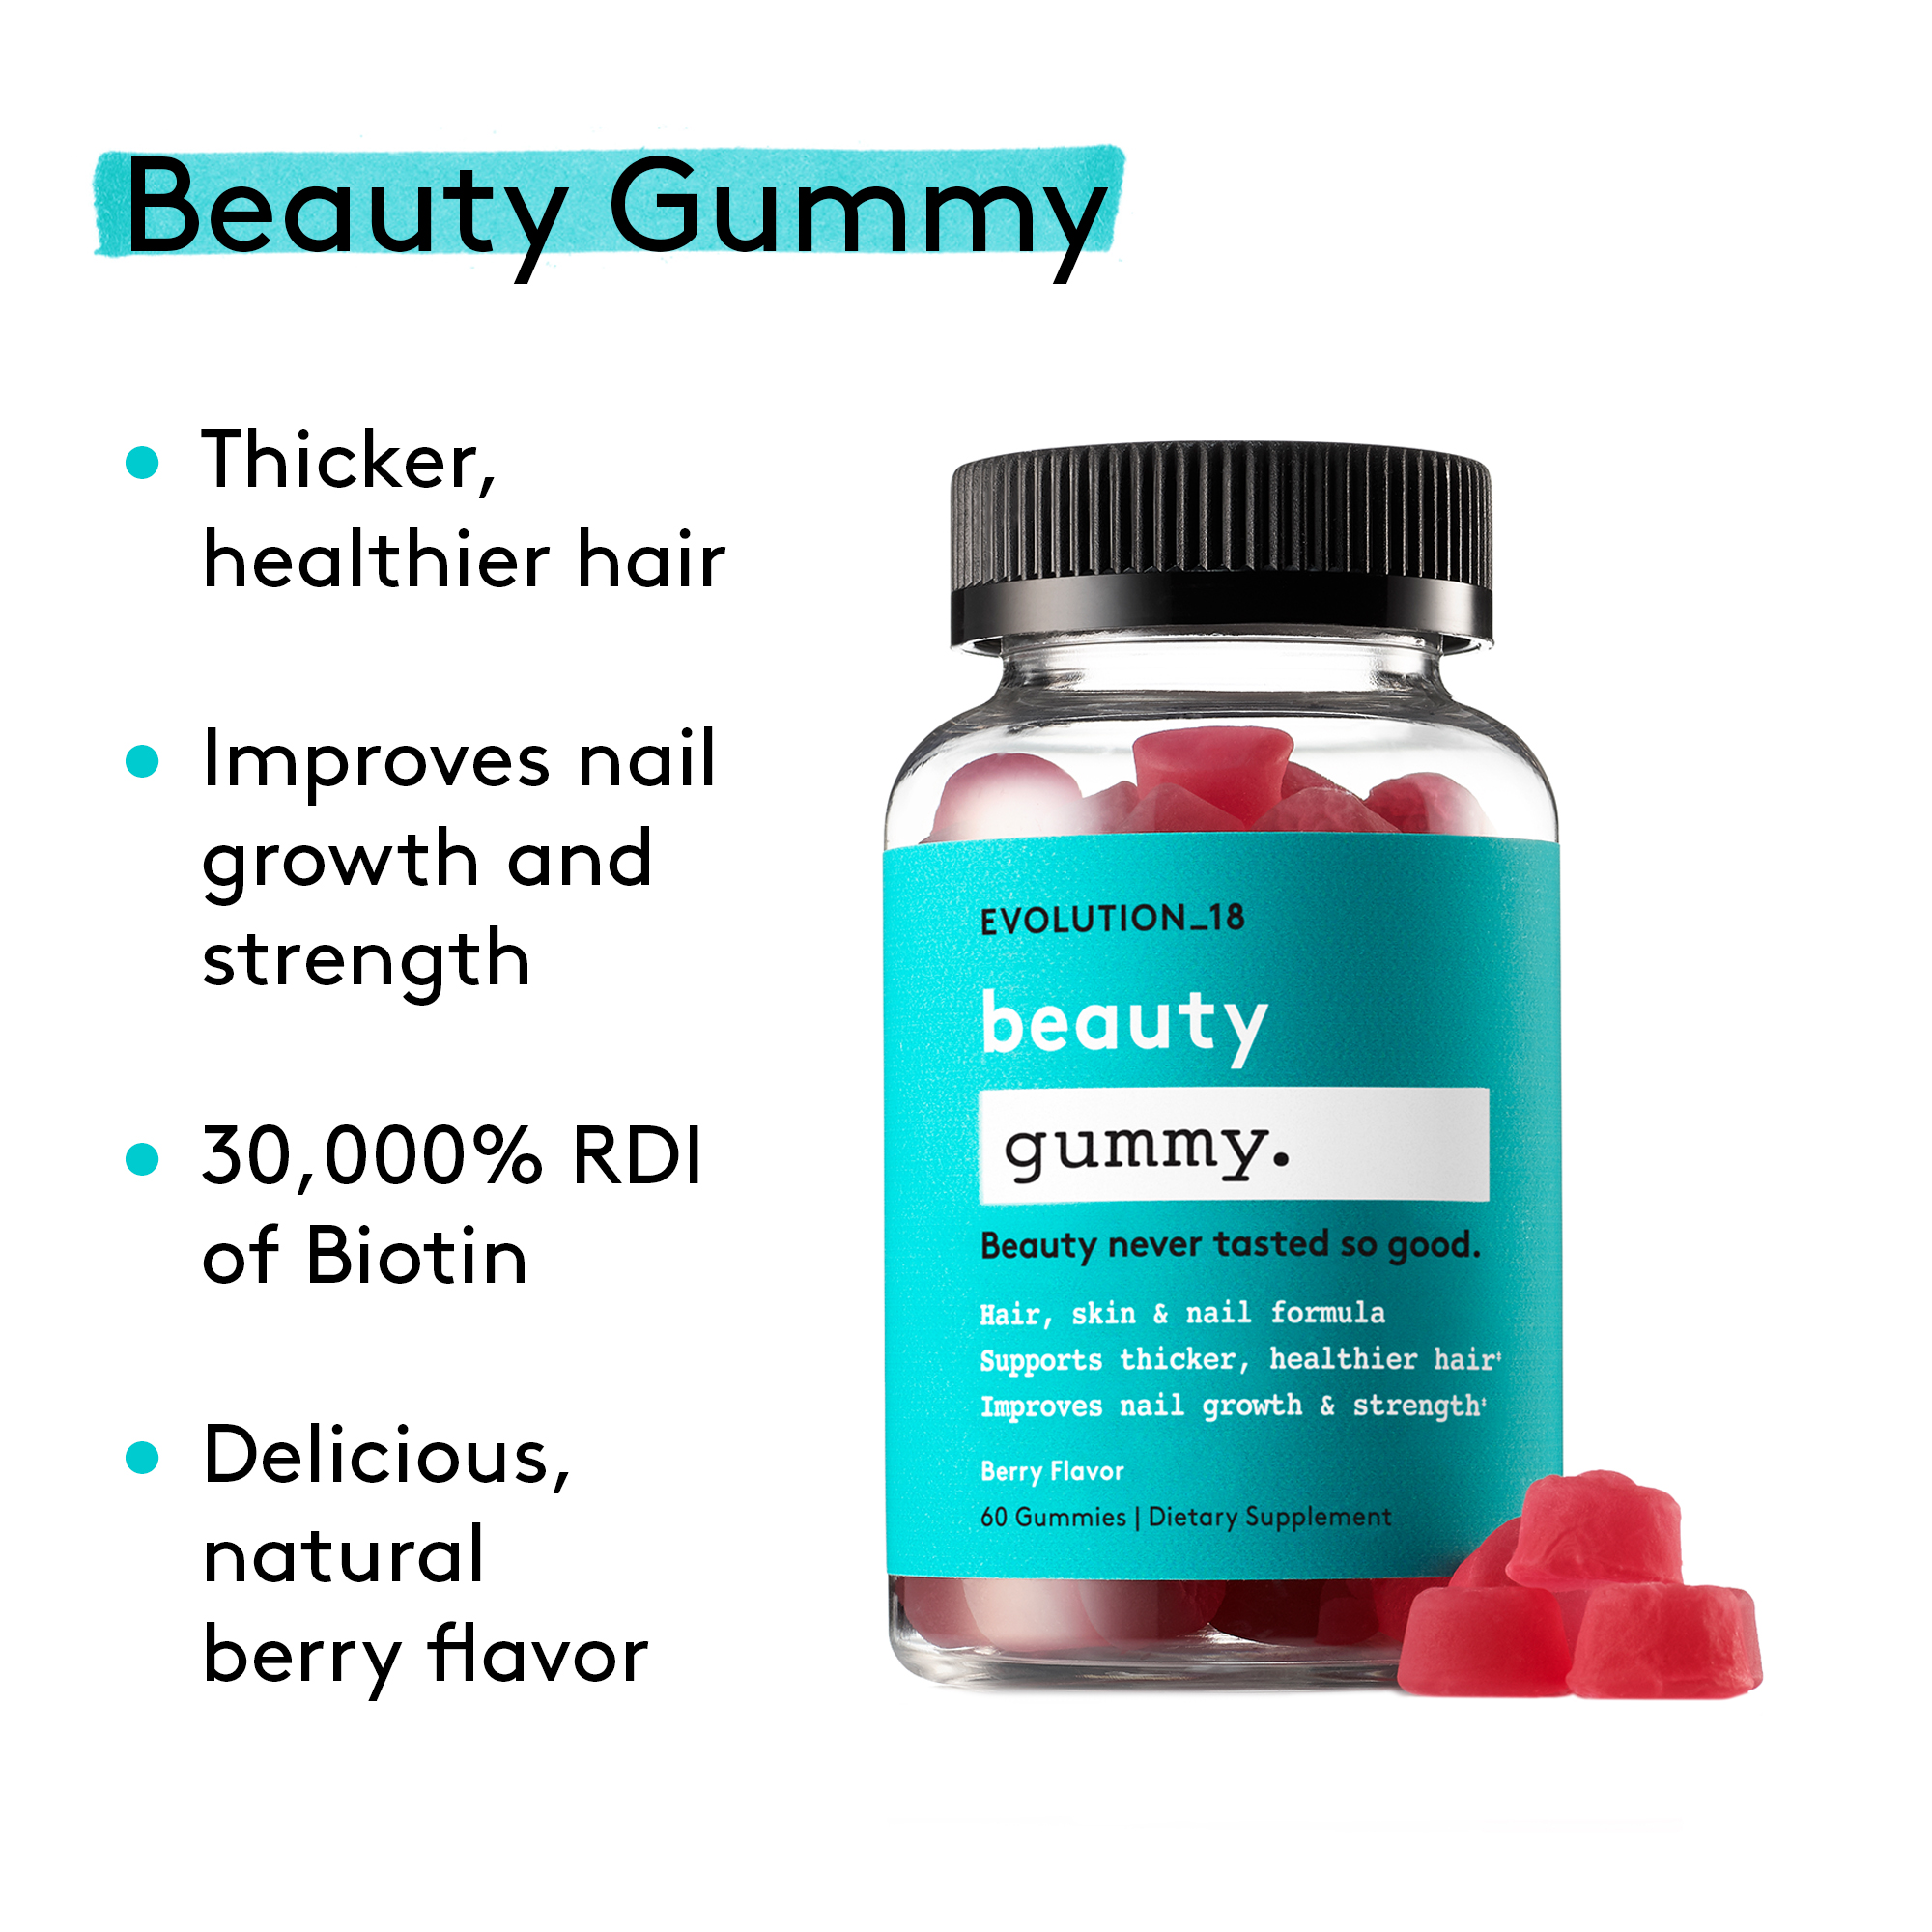 EVOLUTION_18 Beauty Hair and Nail Growth Gummy with Biotin and Keratin, Berry, 30 Servings - image 3 of 5